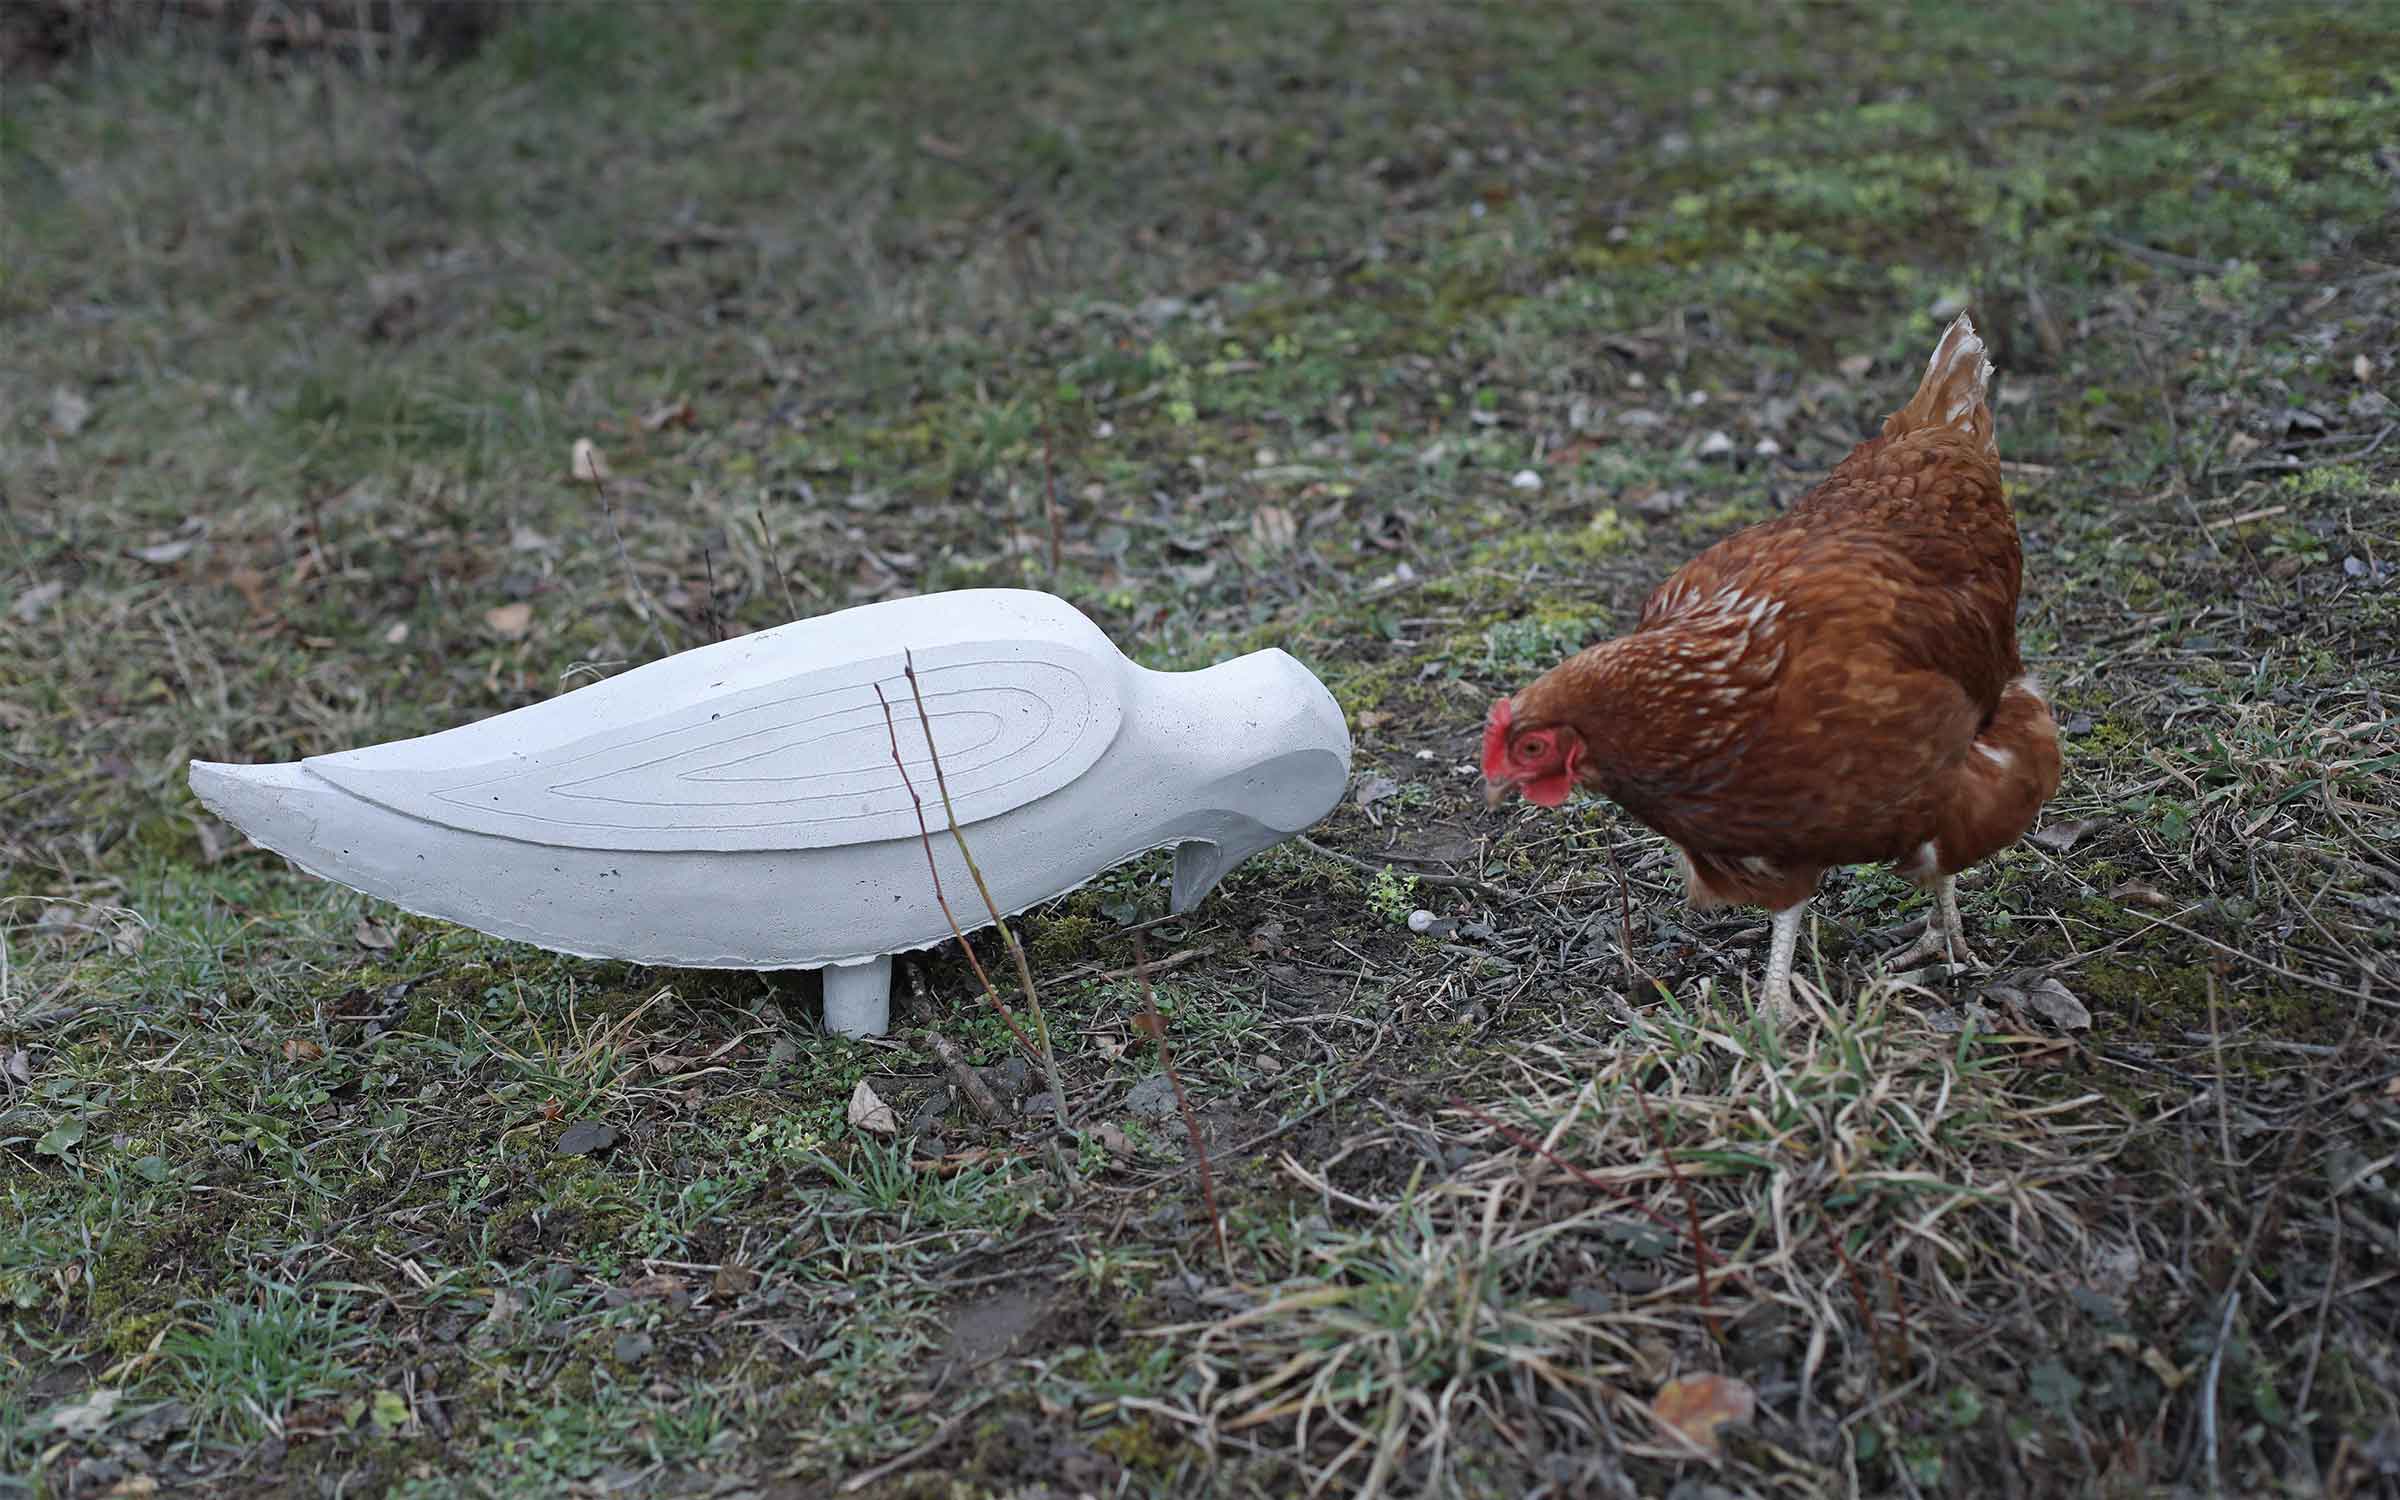 A chicken interacting with one of Hulačová's sculptures in her garden. Photo by Michaela Čejková for Art Basel.